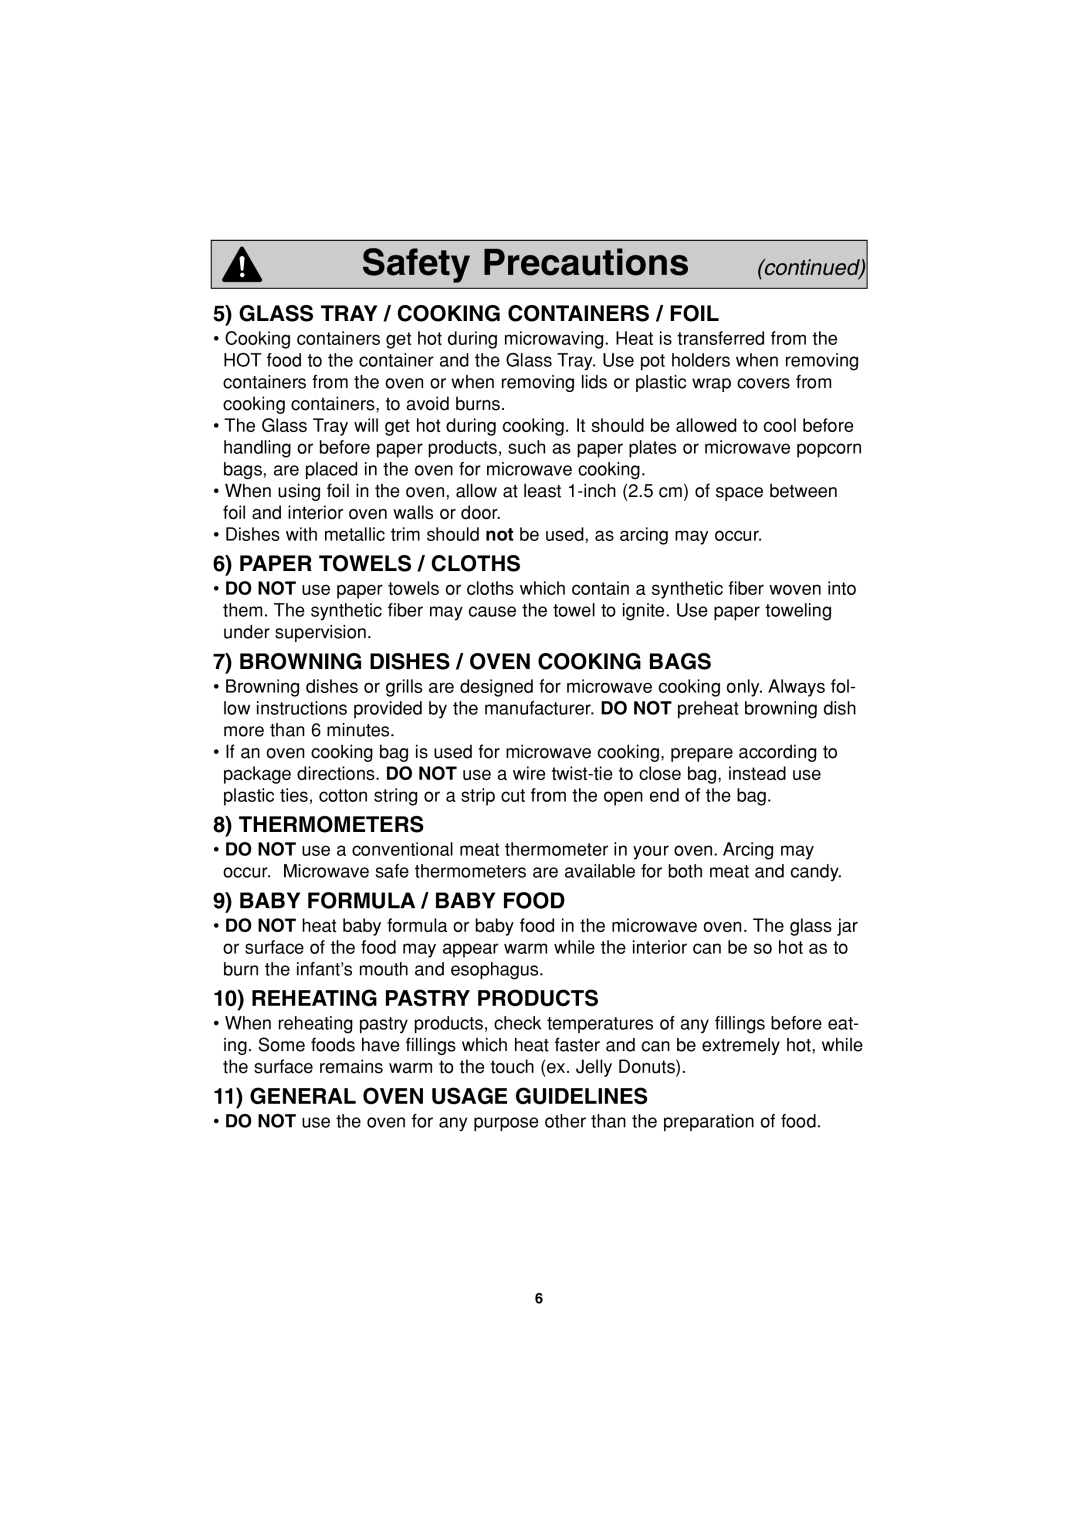 Panasonic NN-S443 Safety Precautions, Glass Tray / Cooking Containers / Foil, Paper Towels / Cloths, Thermometers 